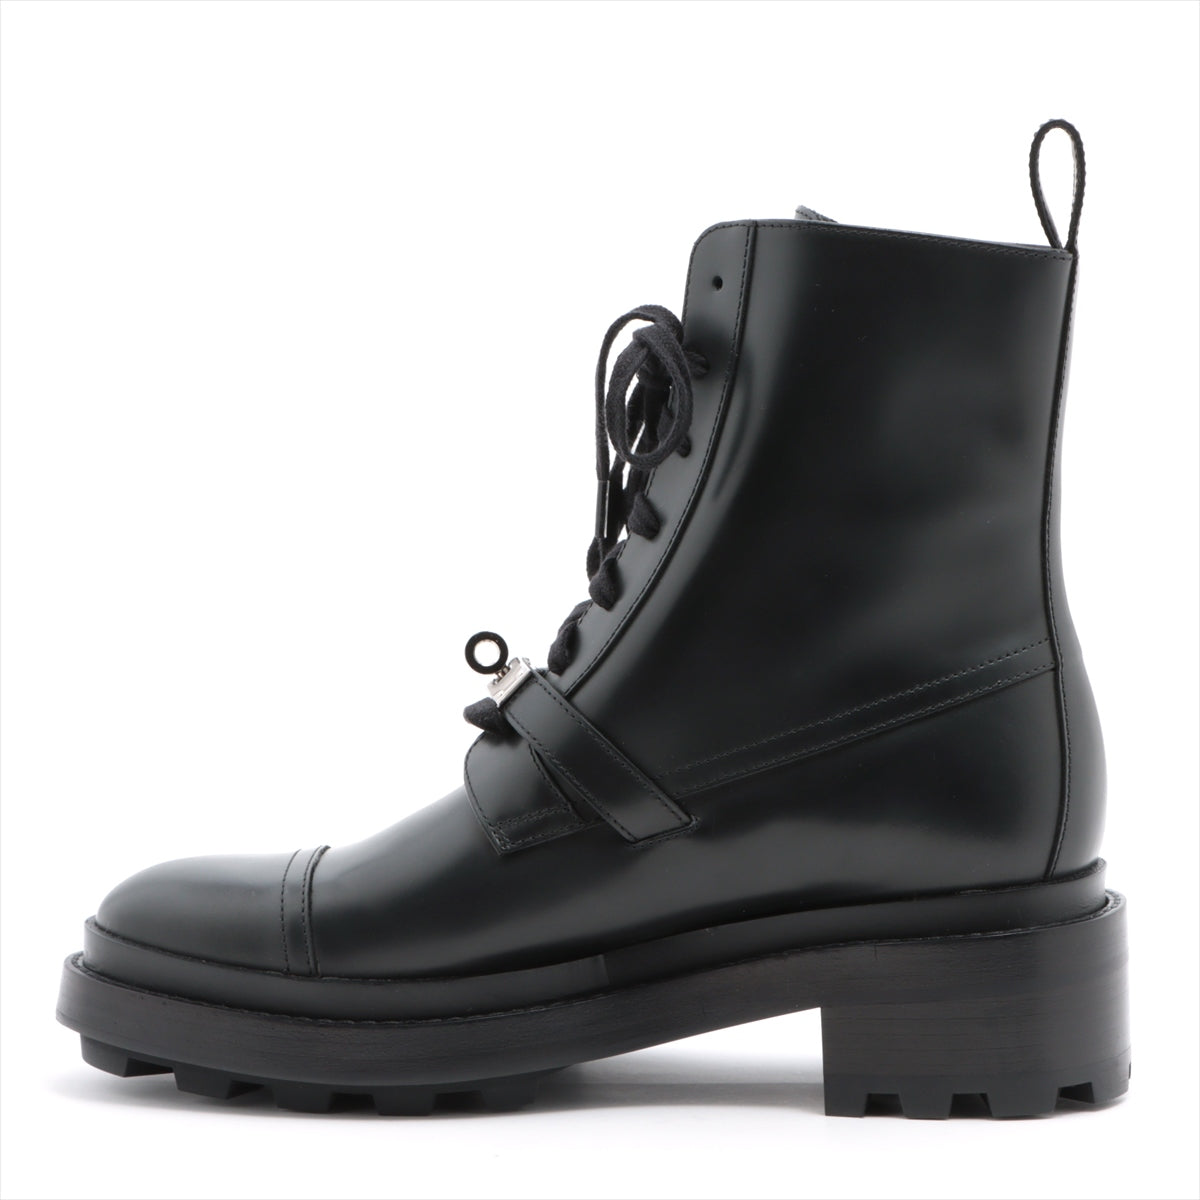 Hermès Funk Leather Short Boots 38 1/2 Ladies' Black Kelly metal fittings box There is a bag